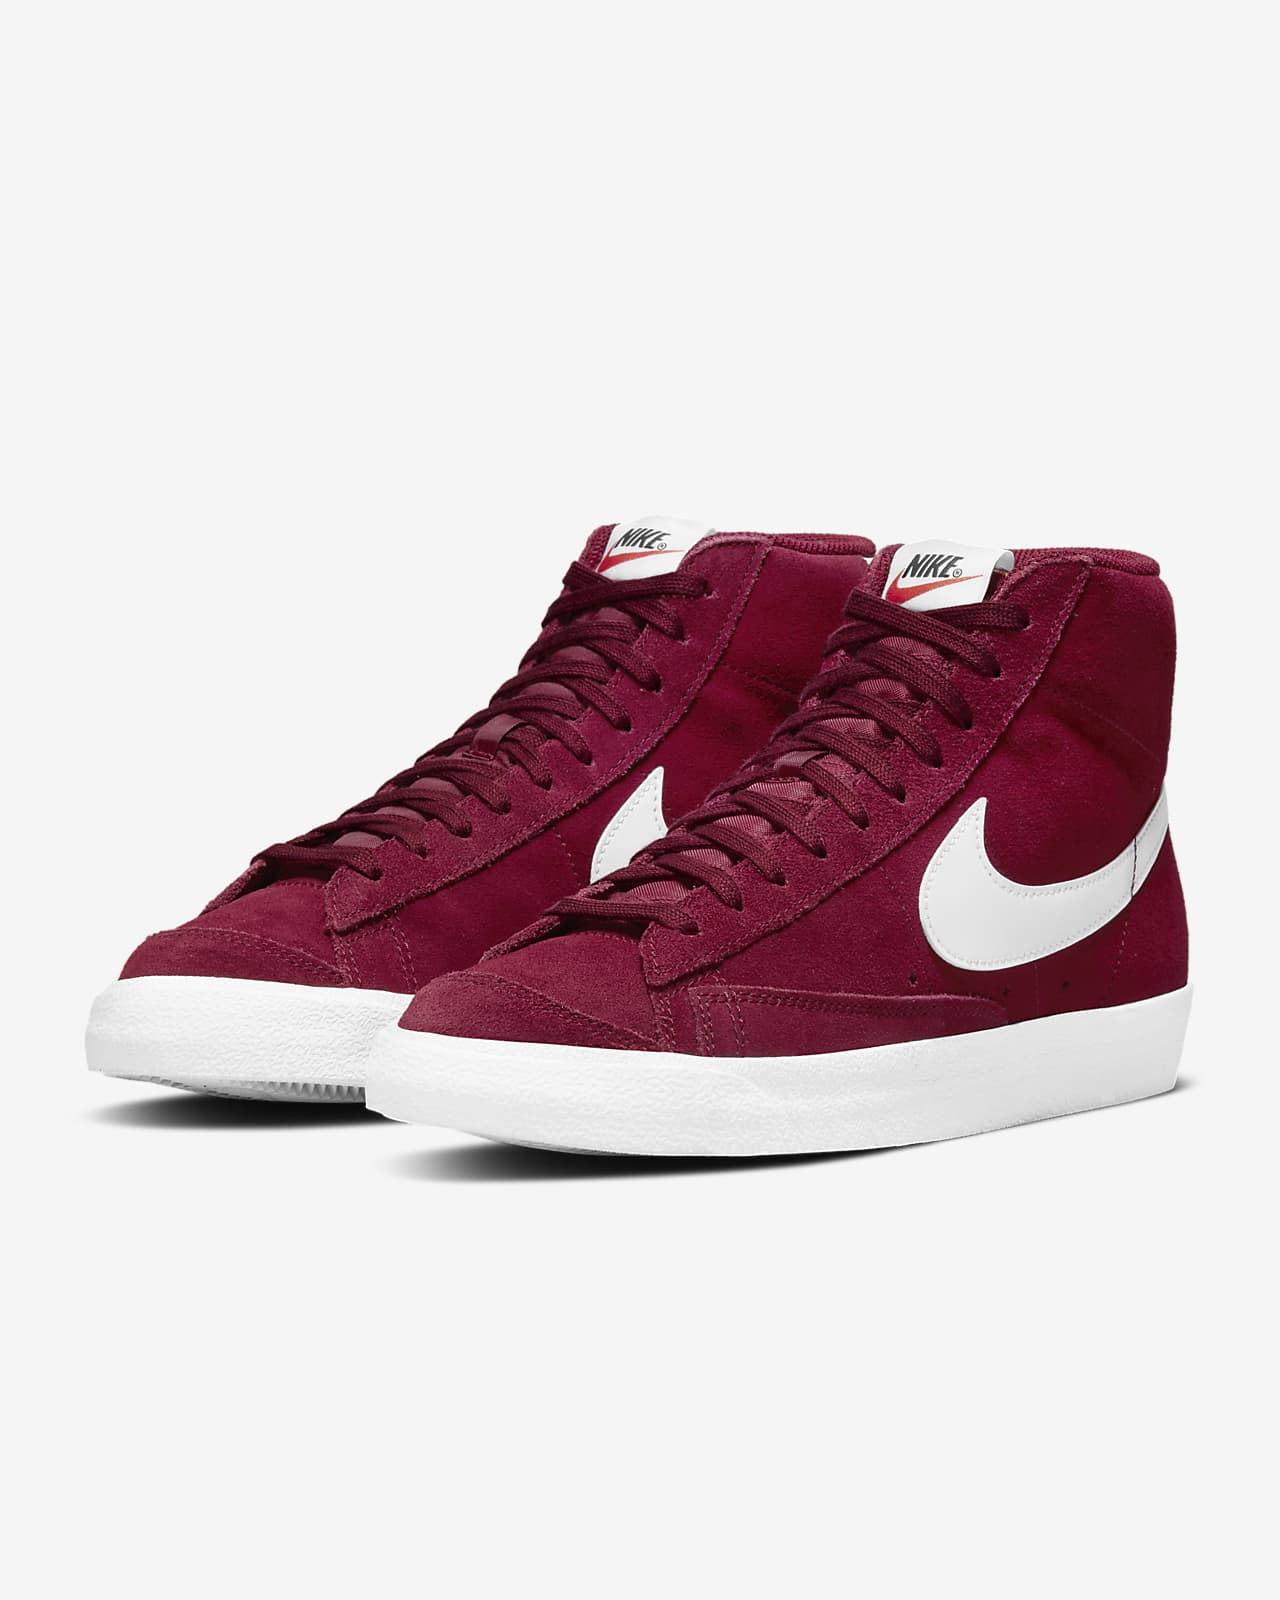 Nike Blazer Mid 77 Suede Shoes Review